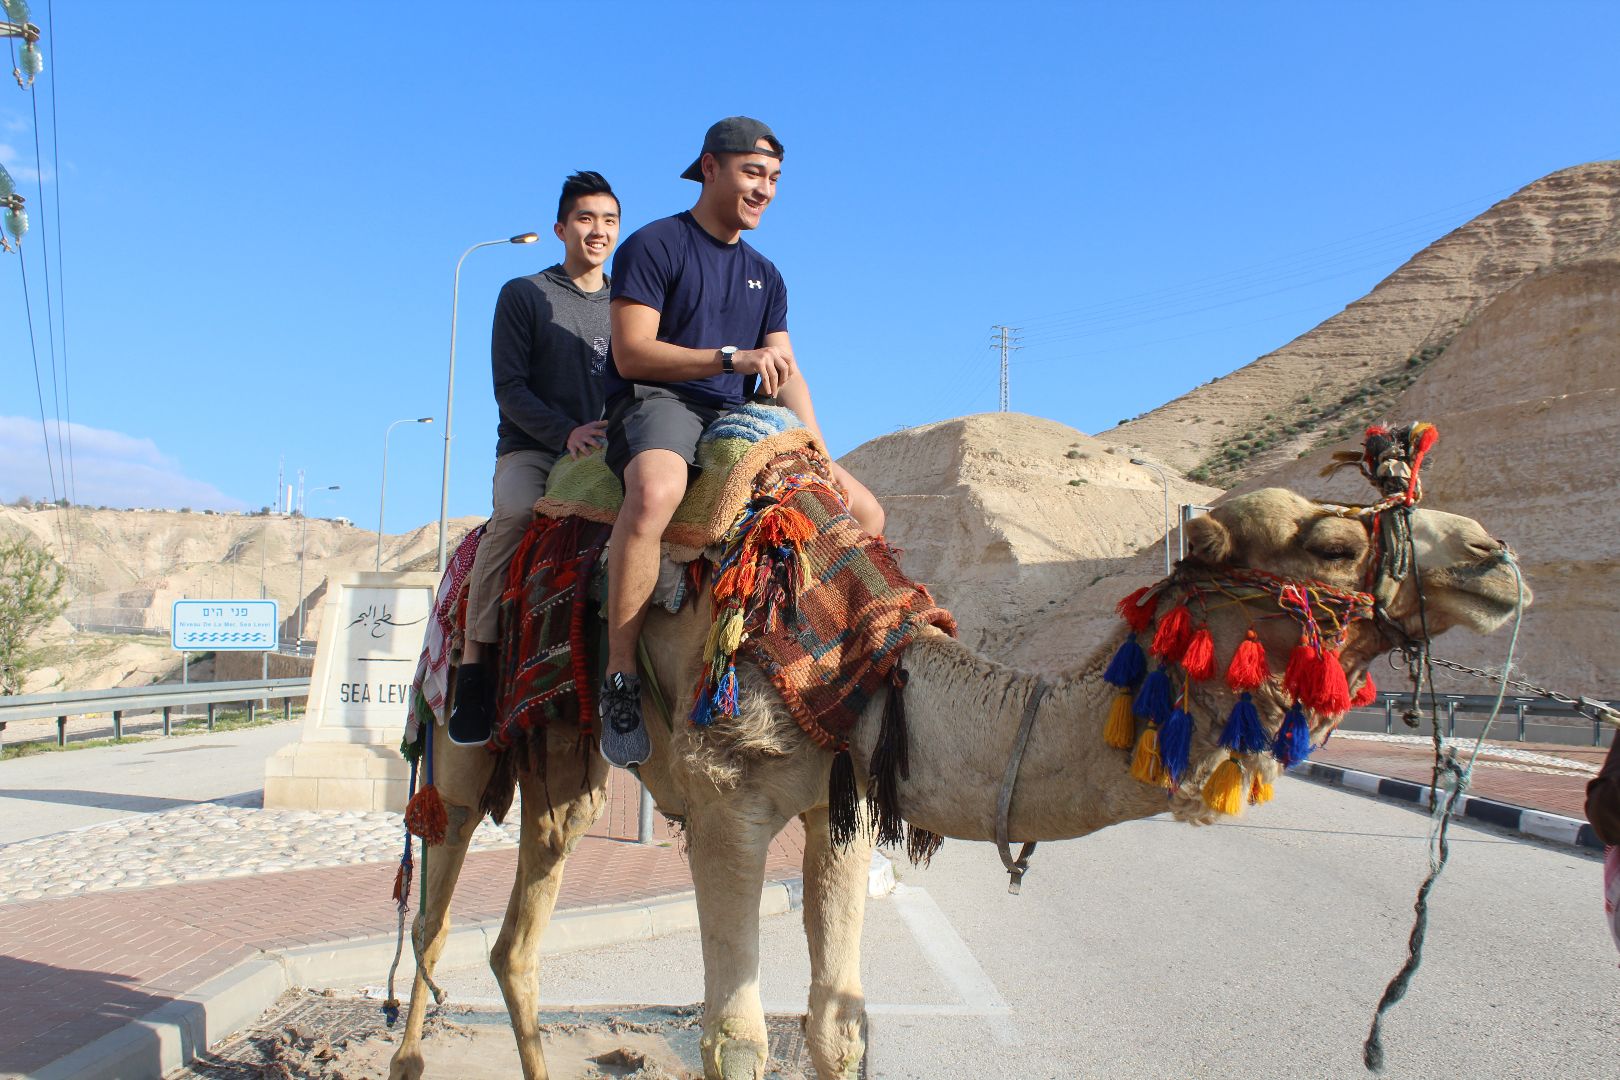 Riding a camel in Israel